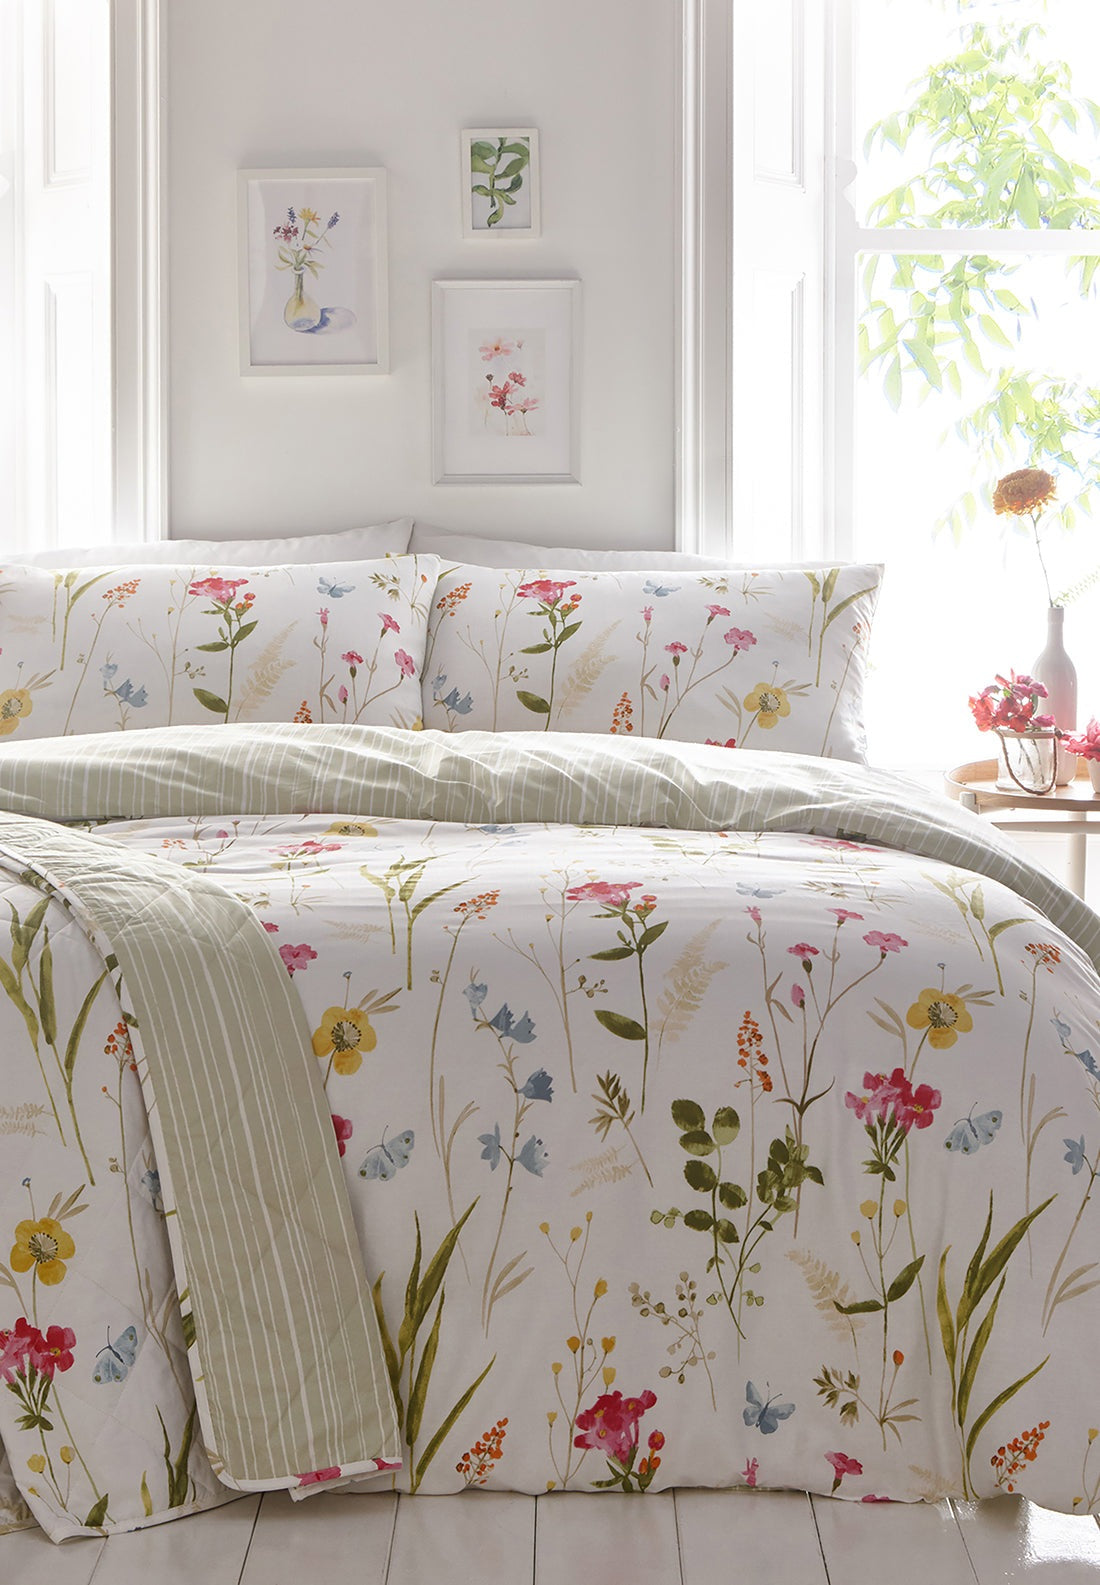 The Home Collection Spring Time Bedspread 229cm X 195cm 1 Shaws Department Stores